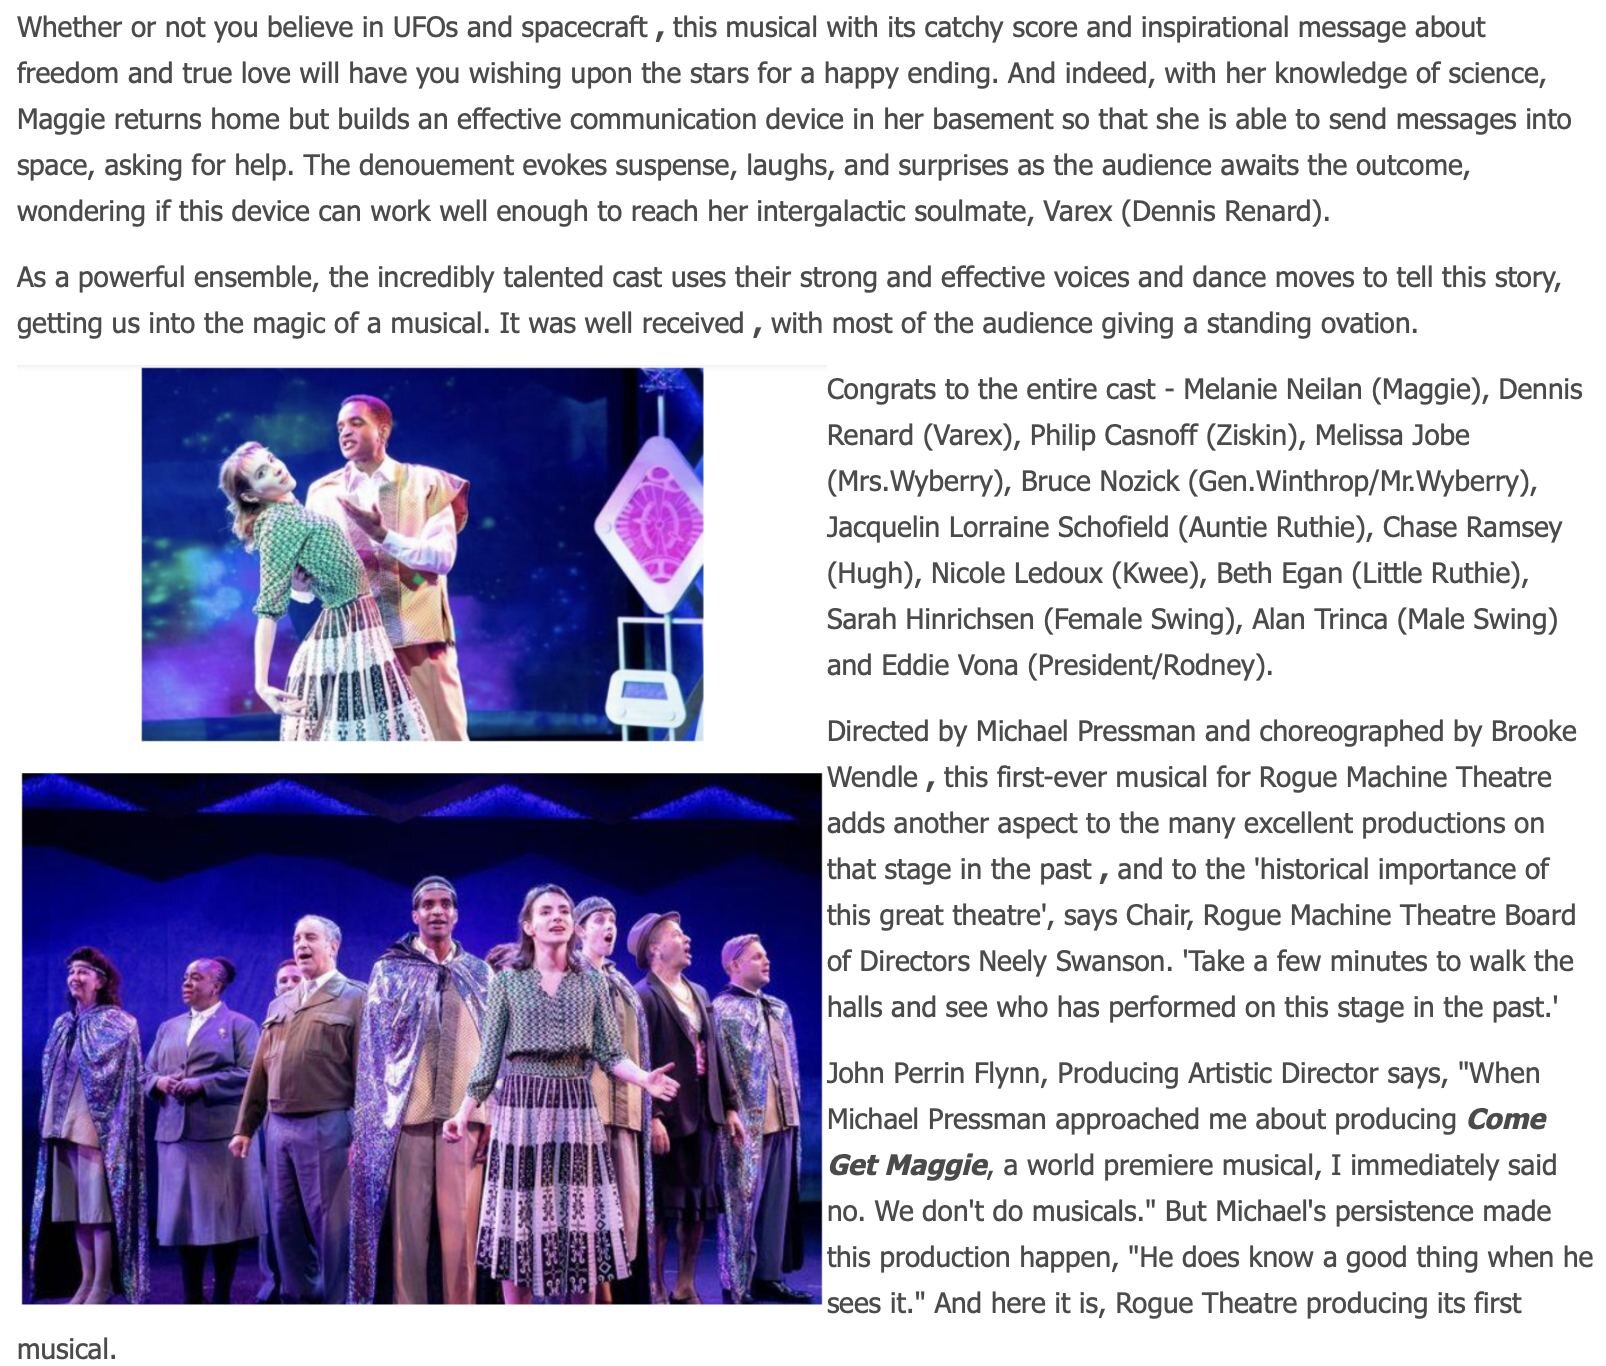 &quot;I watched with increasing delight. This musical with its catchy score and inspirational message about freedom and true love will have you wishing upon the stars for a happy ending. A powerful ensemble, the incredibly talented cast uses their st